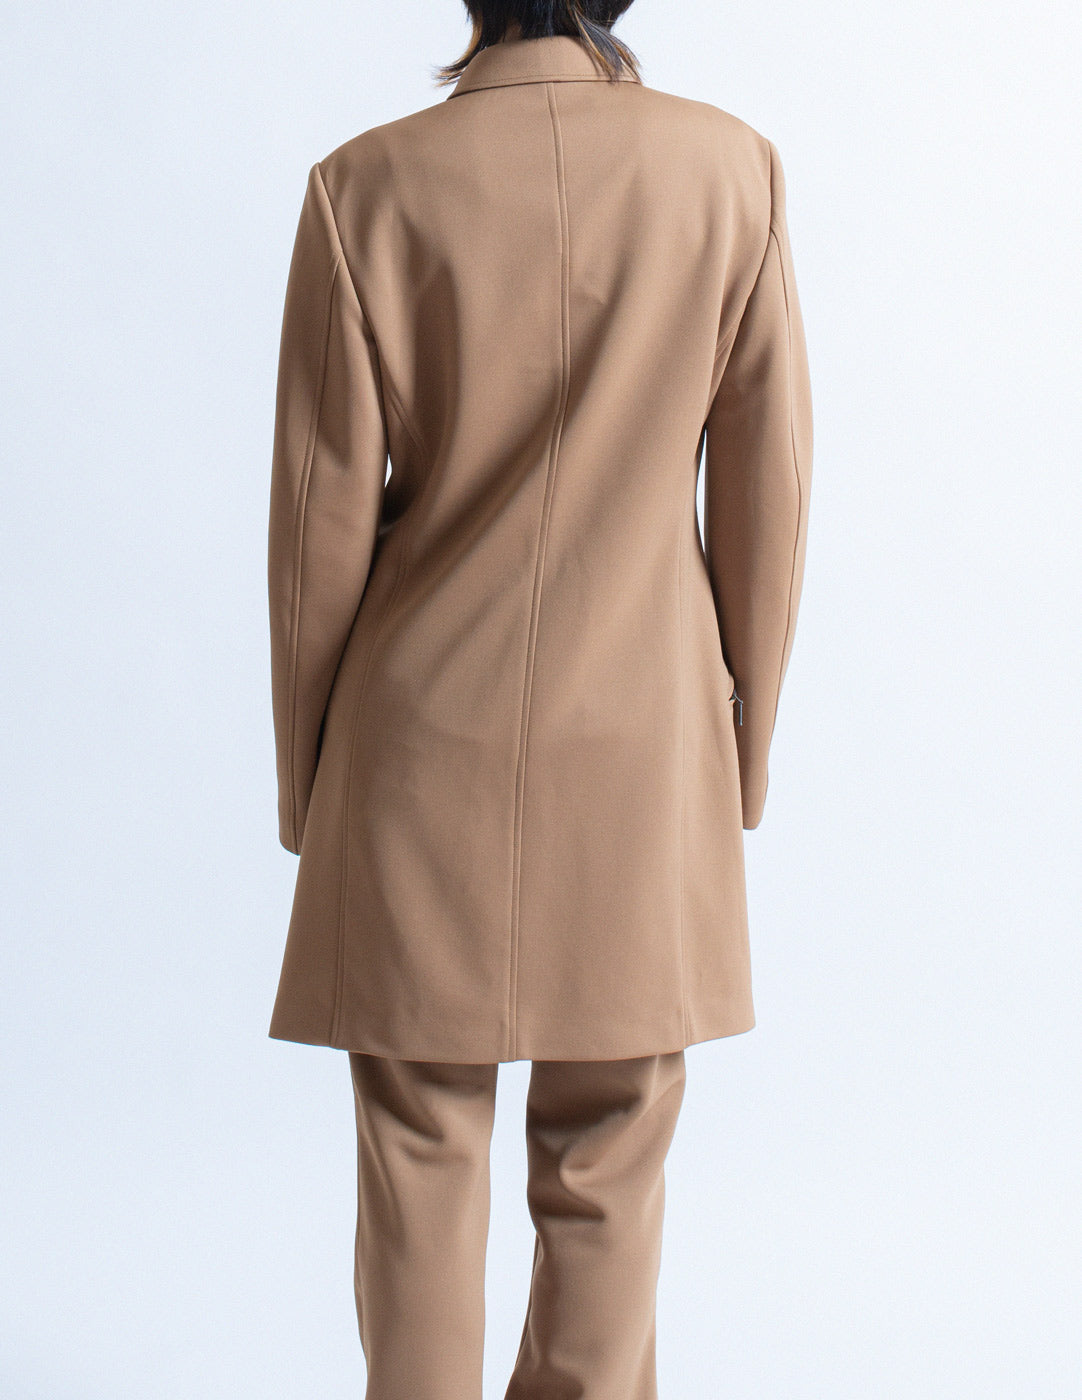 Issey Miyake camel tone long blazer and trousers set back detail